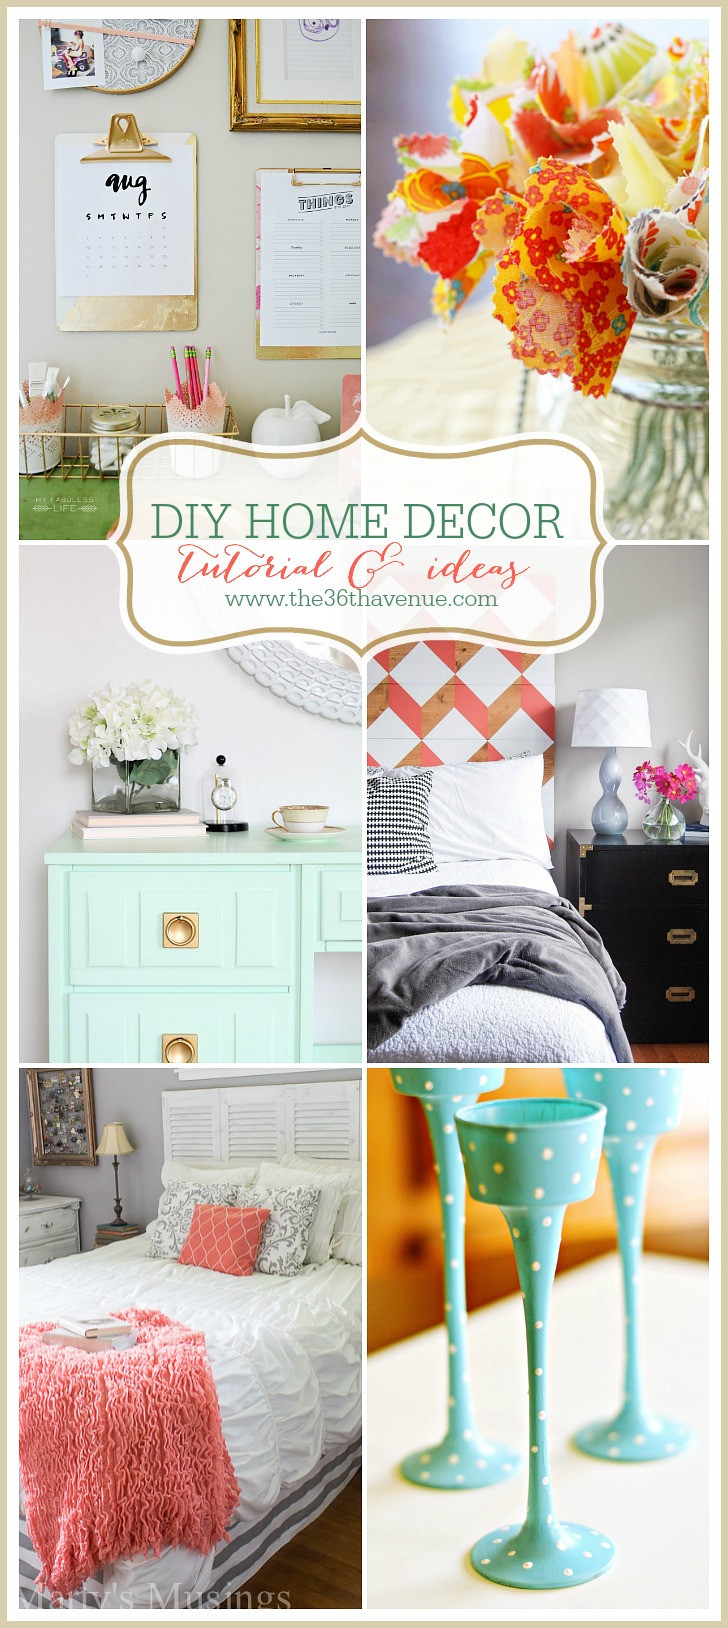 DIY Decor Crafts
 The 36th AVENUE Home Decor DIY Projects